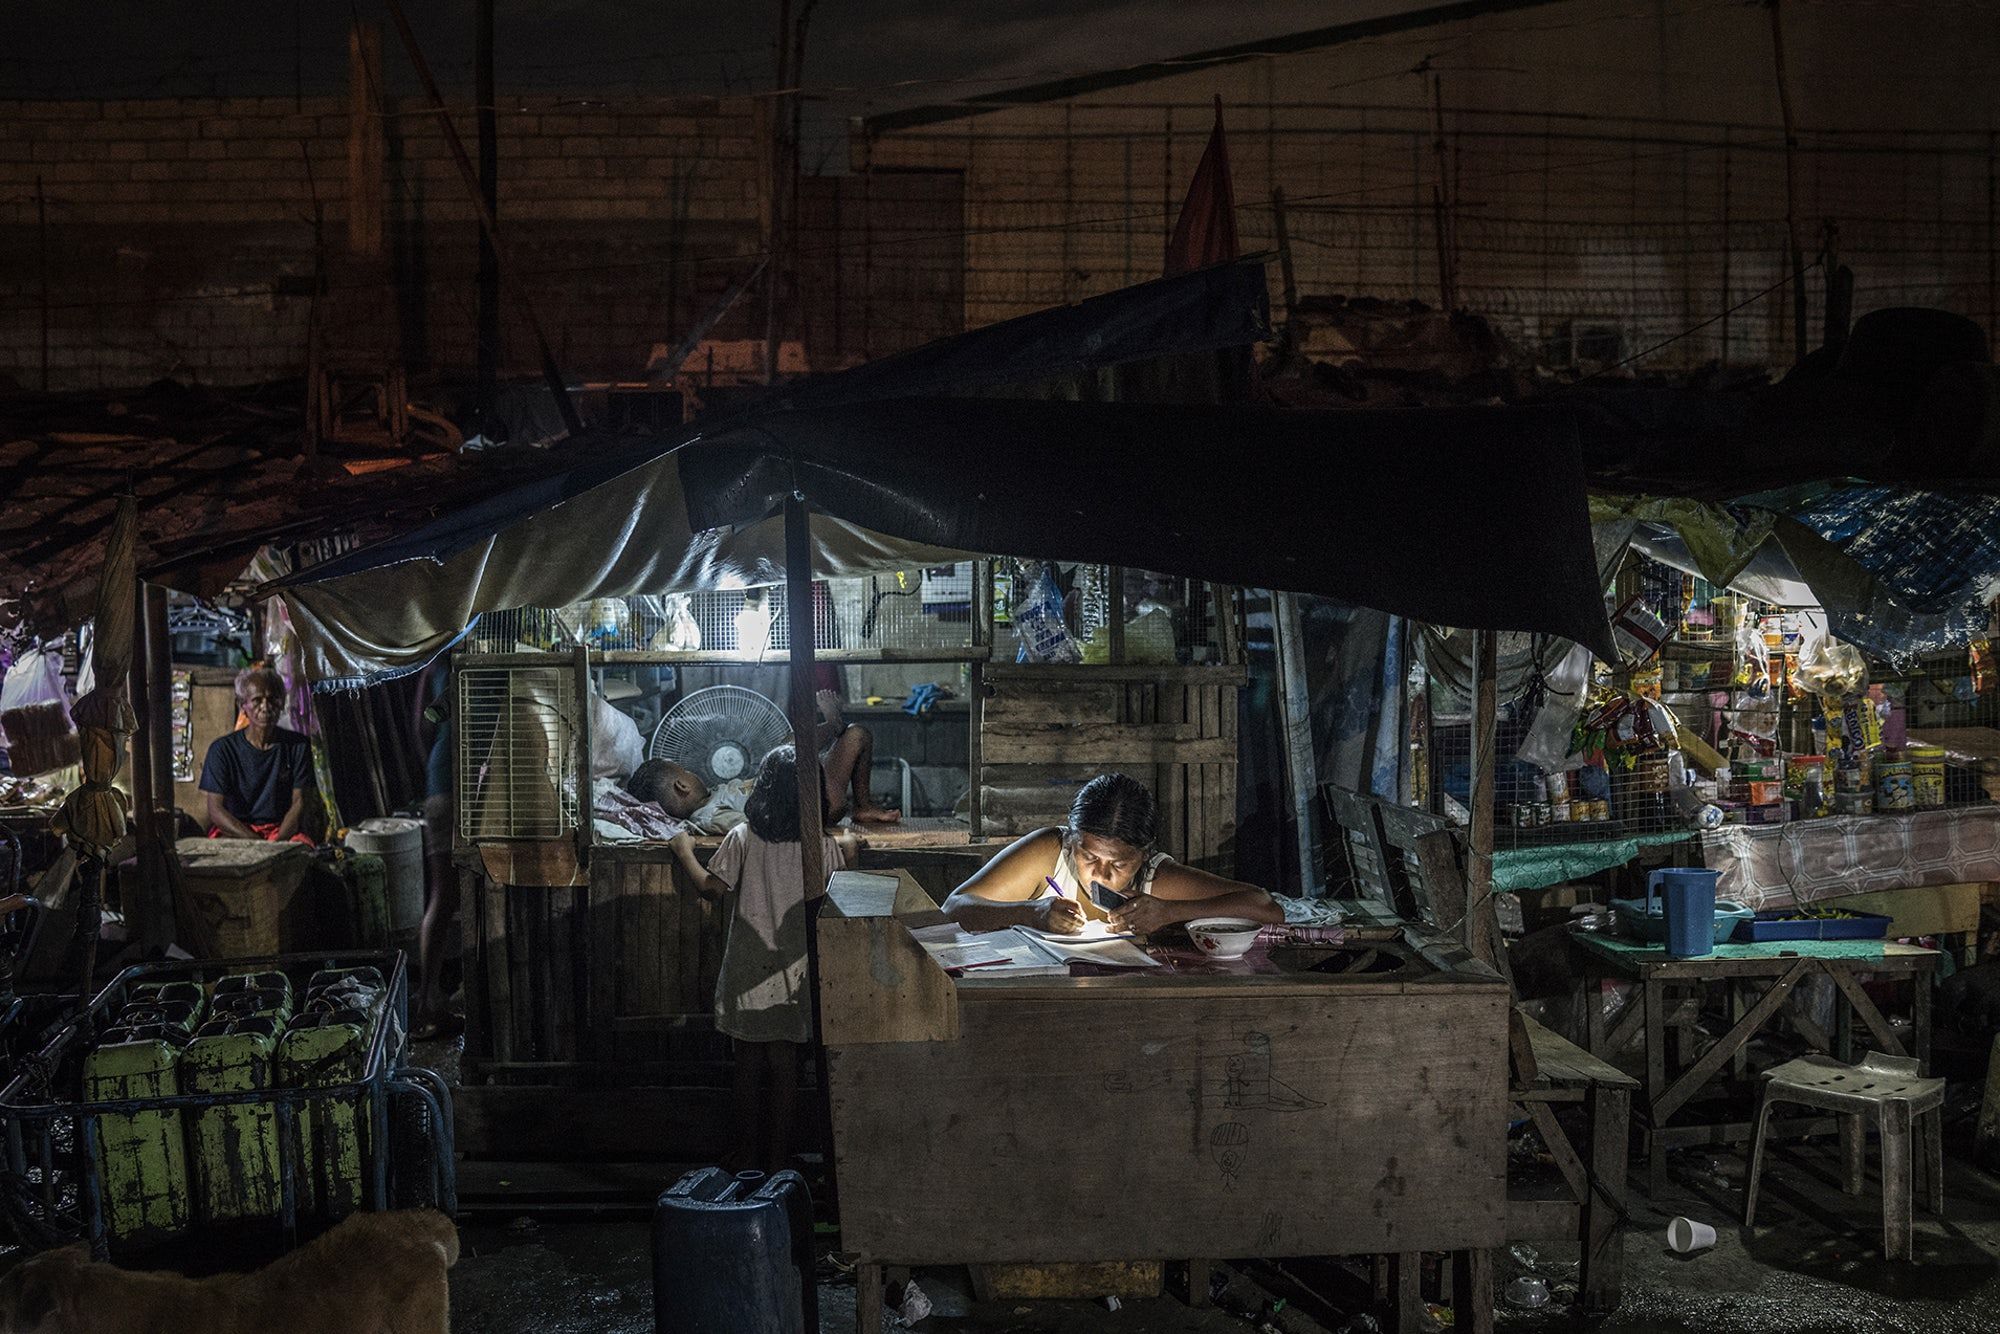 A woman works on bookkeeping using the light of her phone in the Market 3 slum in the Navotas Fish Port Complex. Market 3 has electricity but no plumbing. Residents often turn to drugs to alleviate hunger and stay awake for the long hours they work at low pay. Image by James Whitlow Delano. Philippines, 2017.